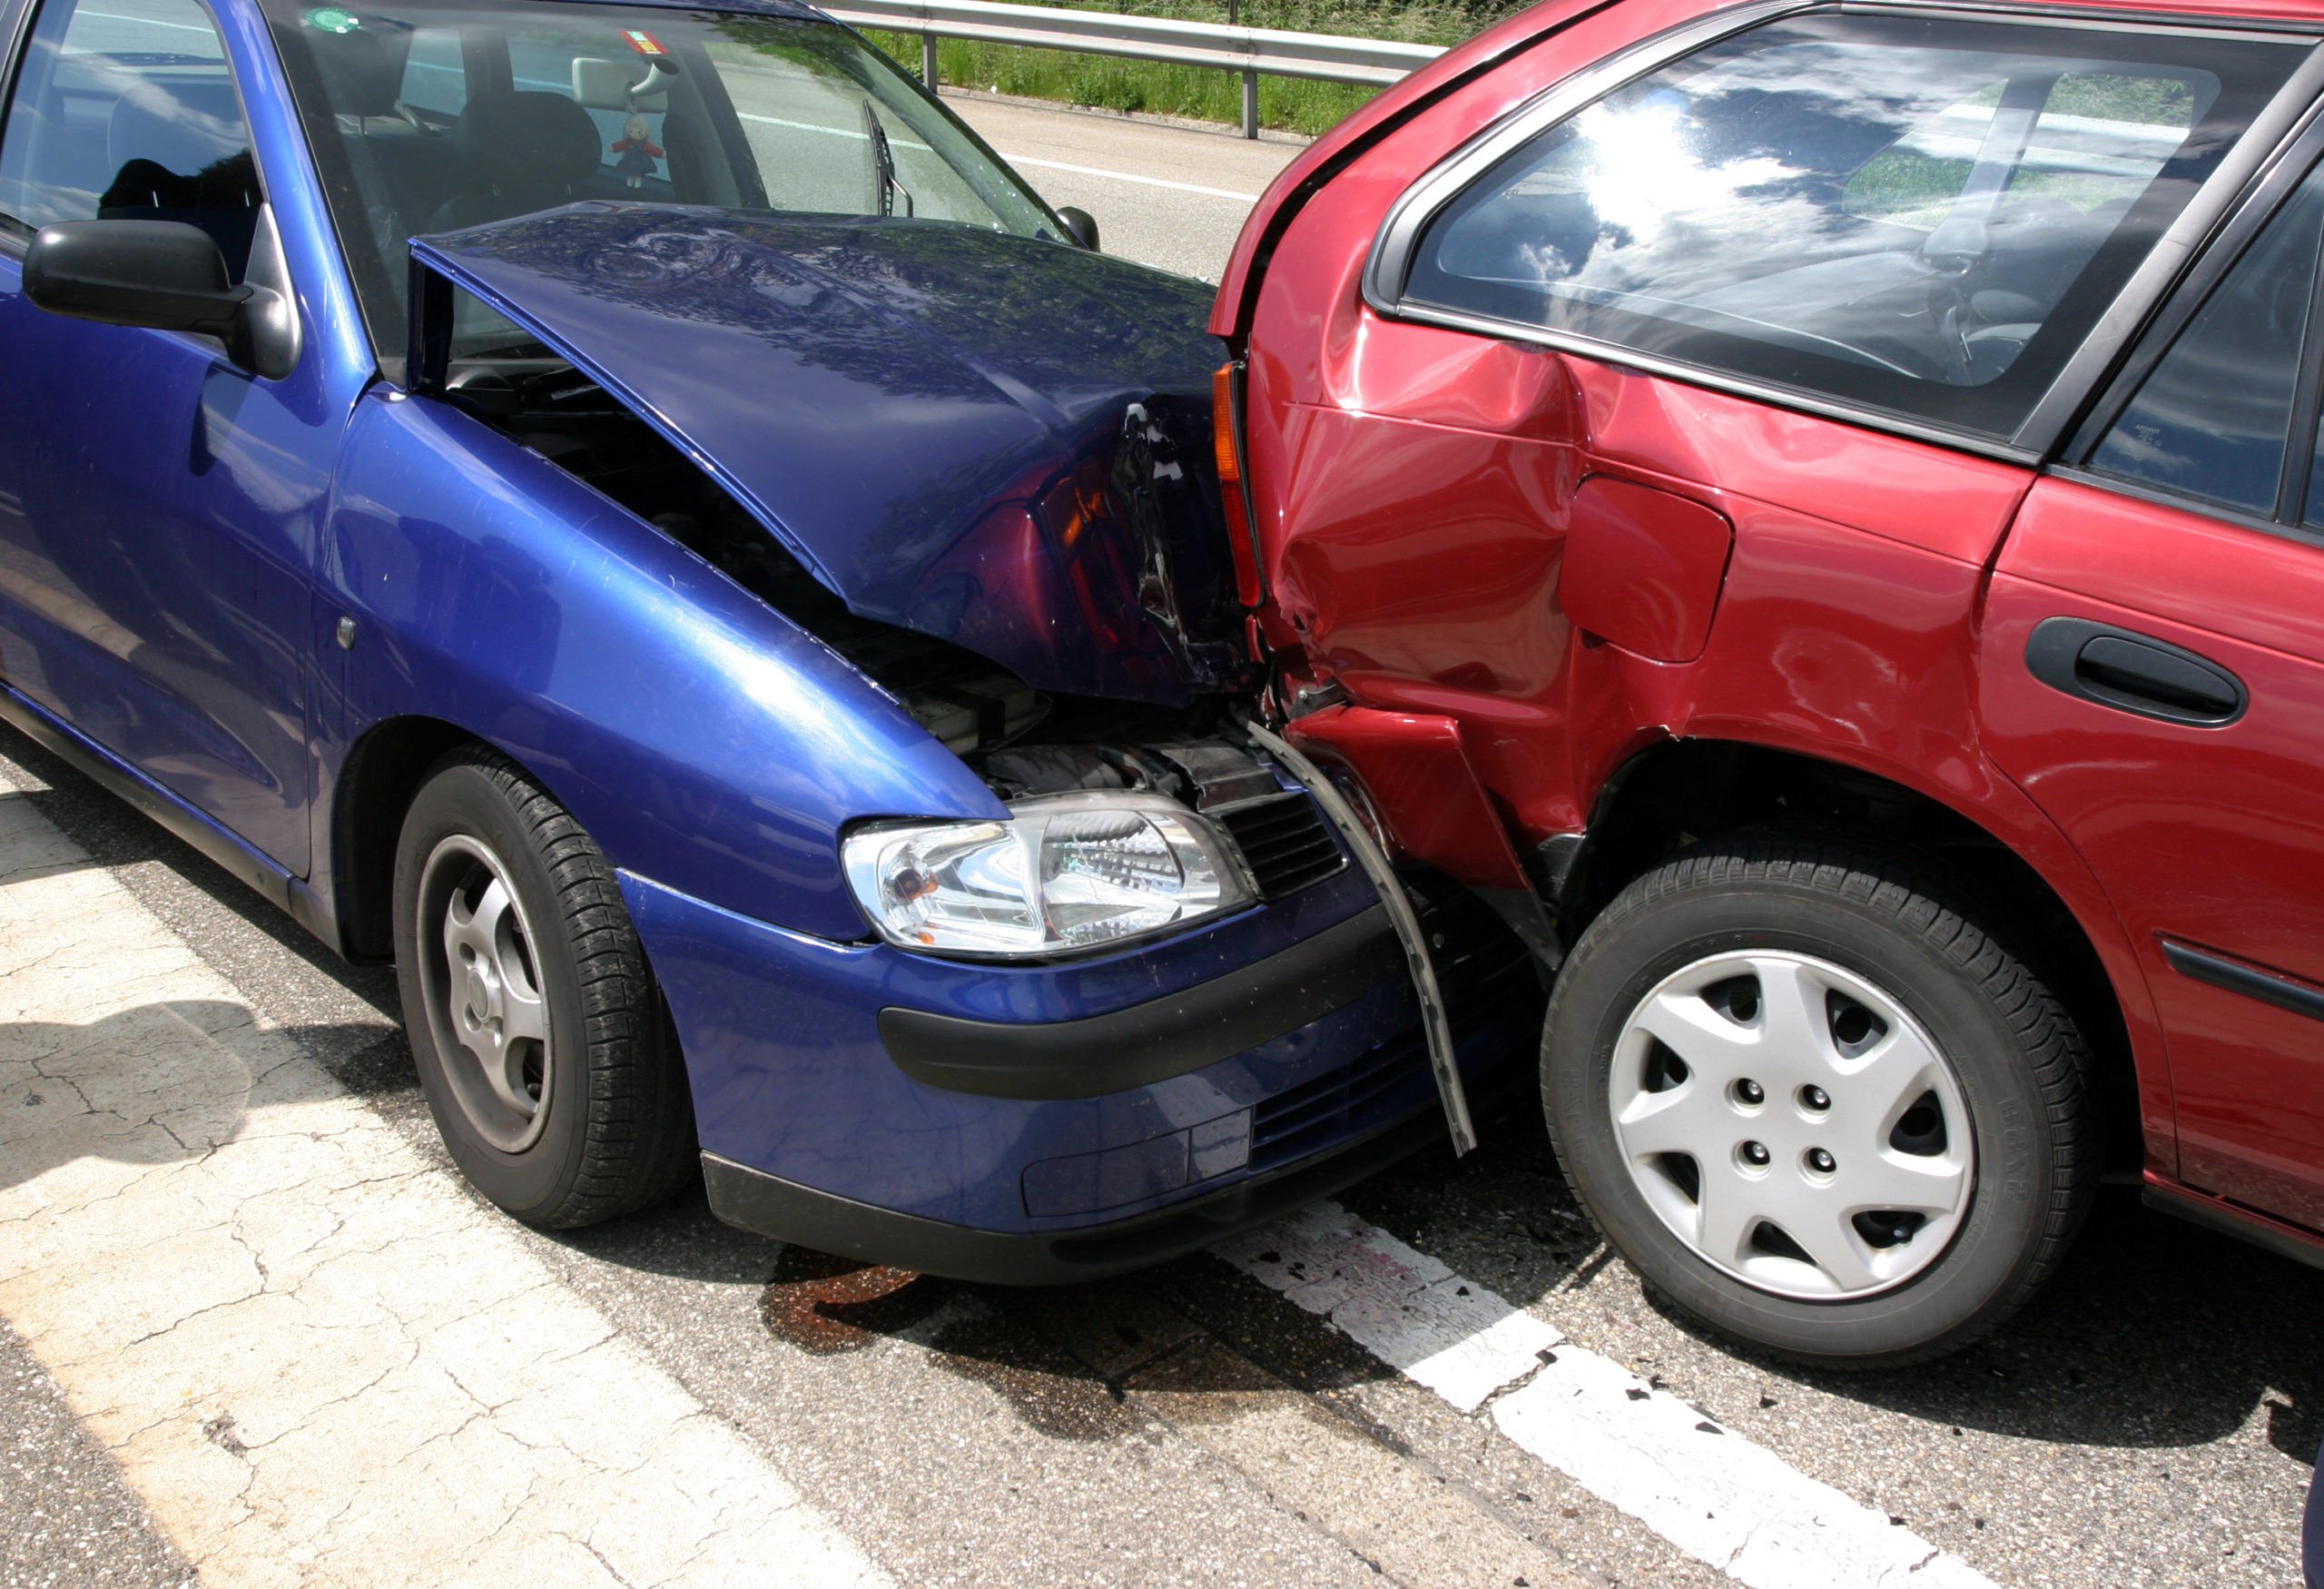 blue car fender bender a red car in Tennessee - What Tennessee Drivers Need to Know about Fault Laws for Car Accidents